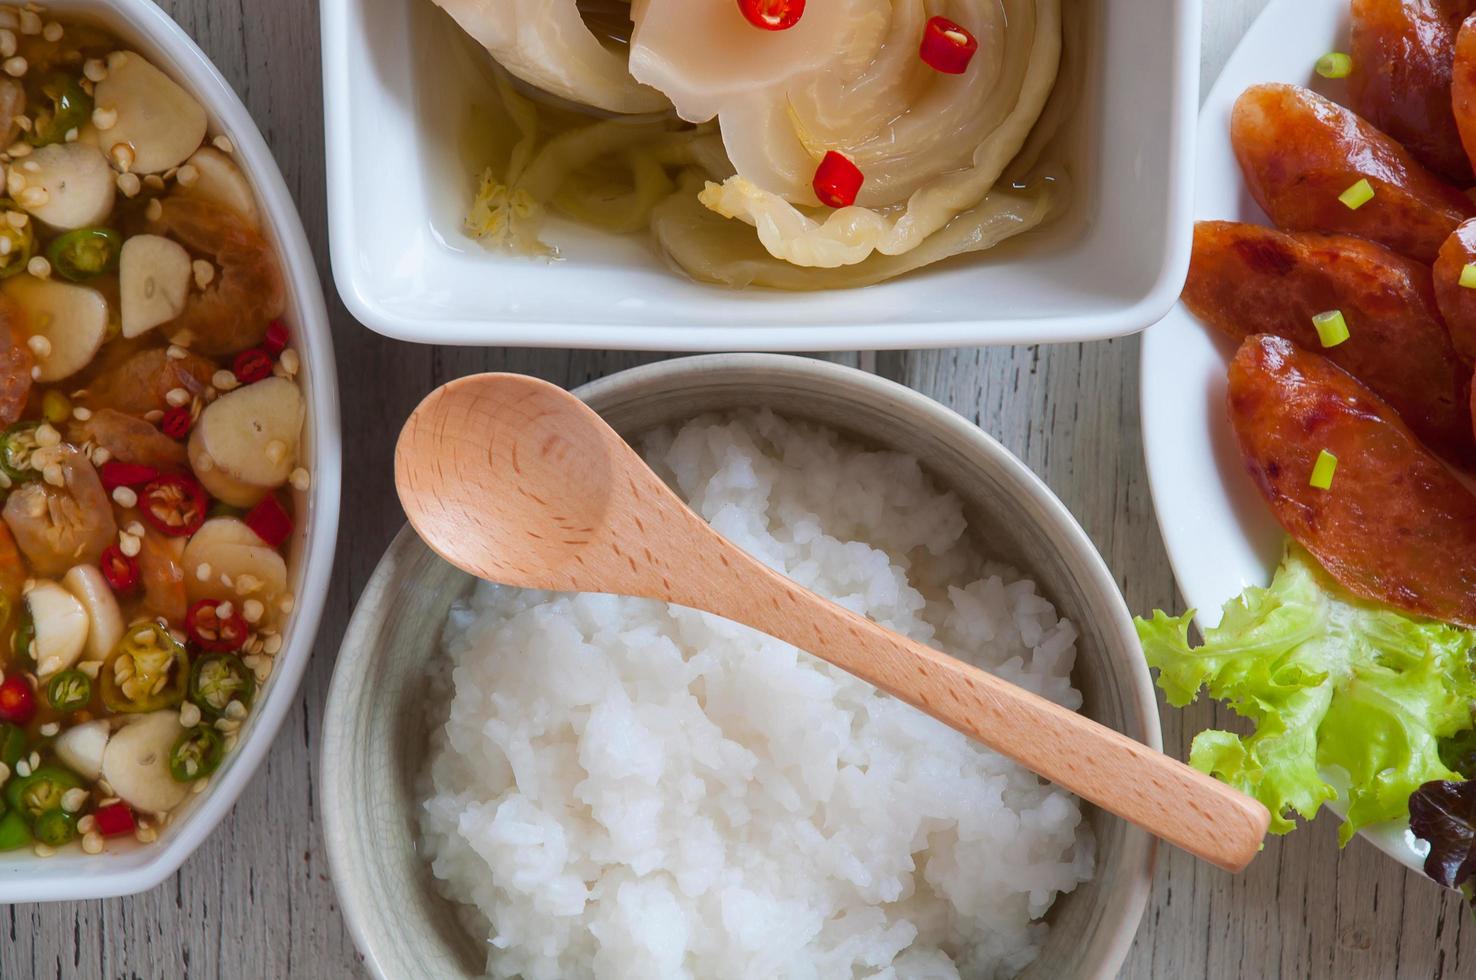 Soft boil rice with other food in Thai style photo